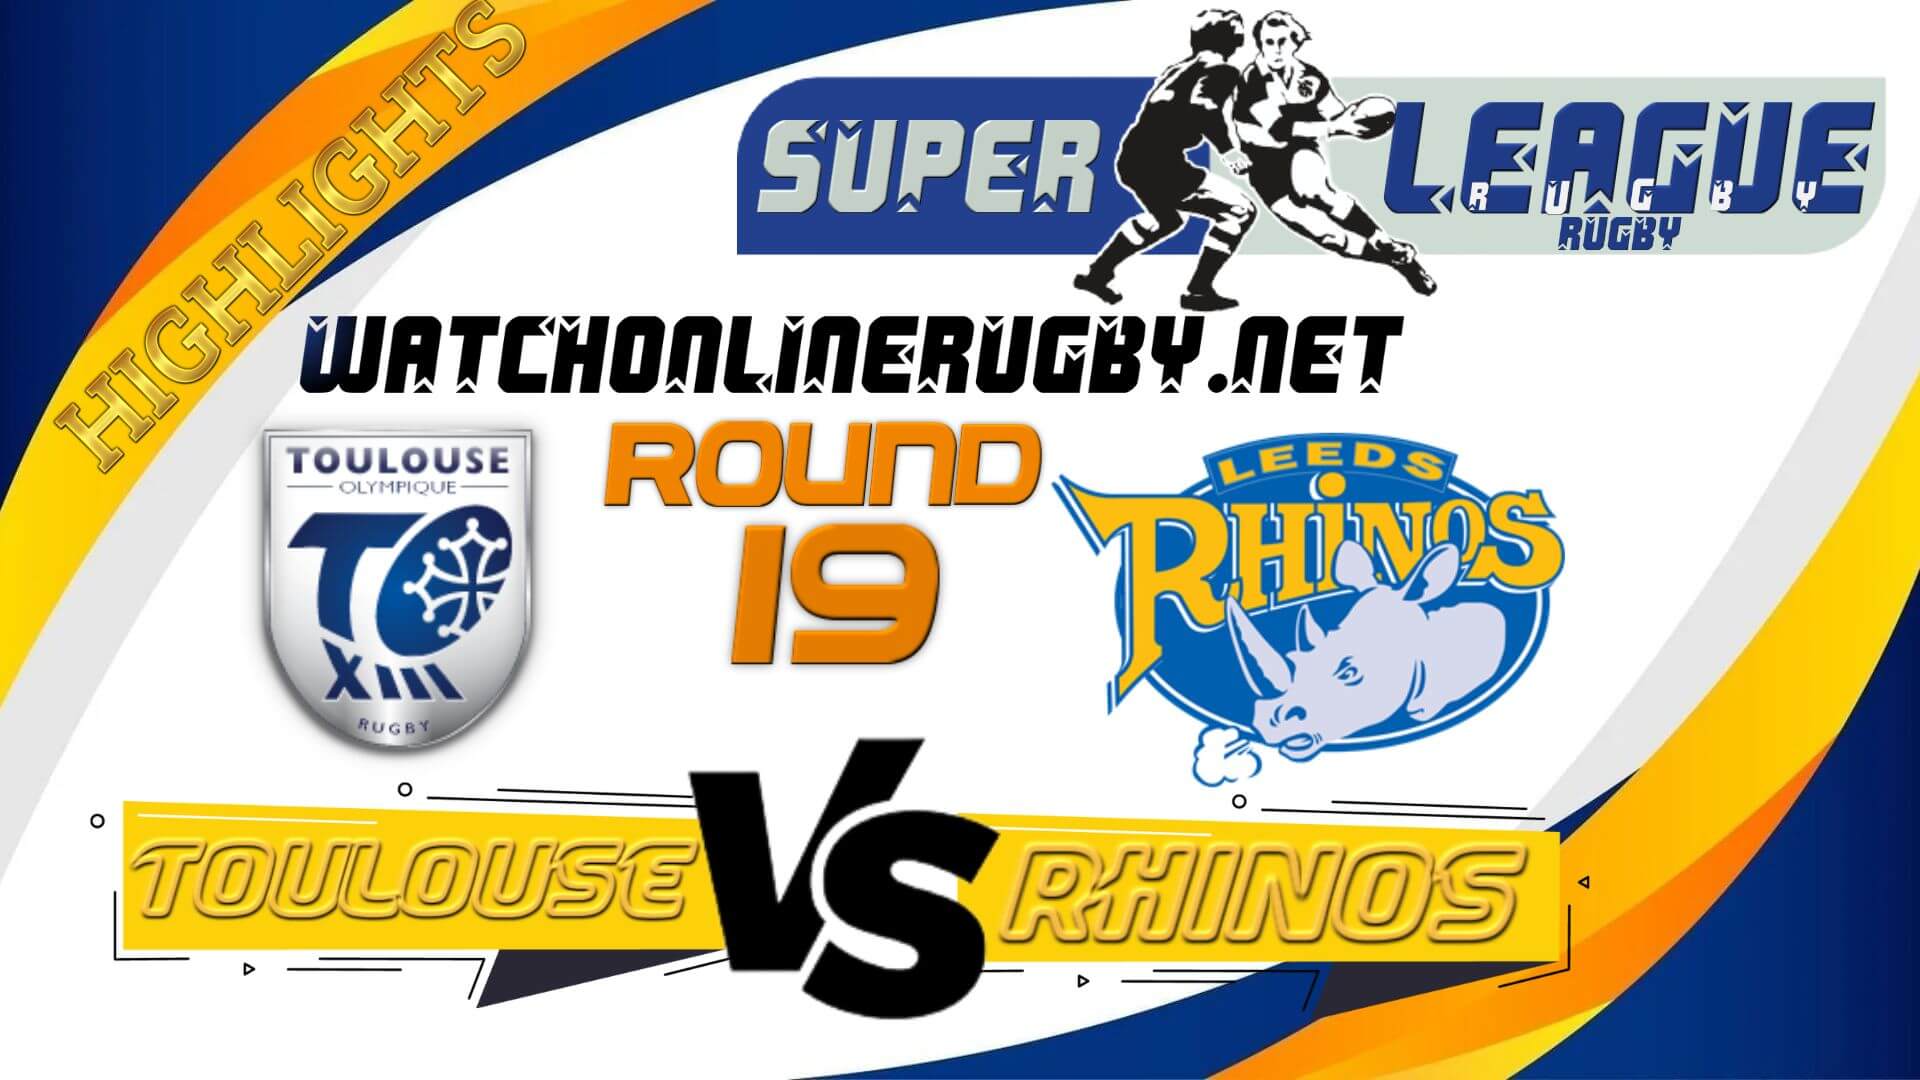 Toulouse Vs Leeds Rhinos Super League Rugby 2022 RD 19